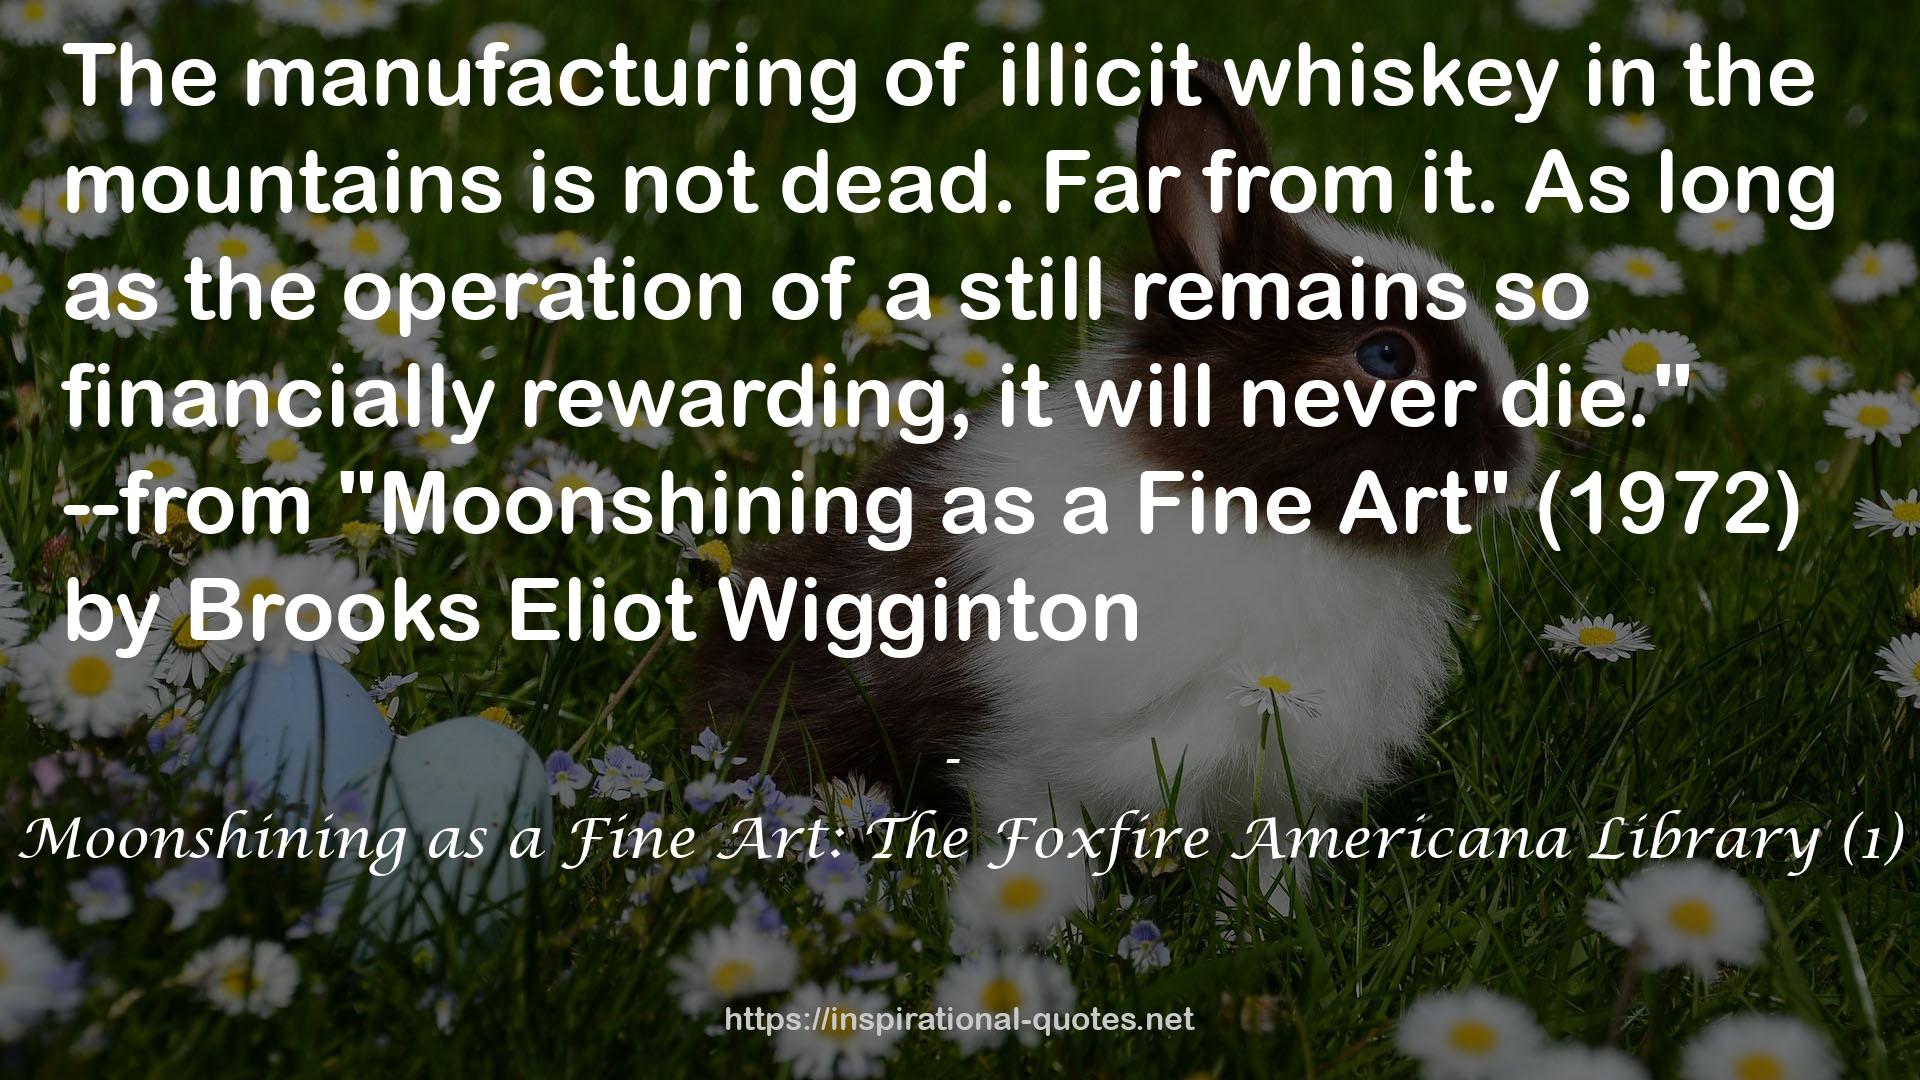 Moonshining as a Fine Art: The Foxfire Americana Library (1) QUOTES